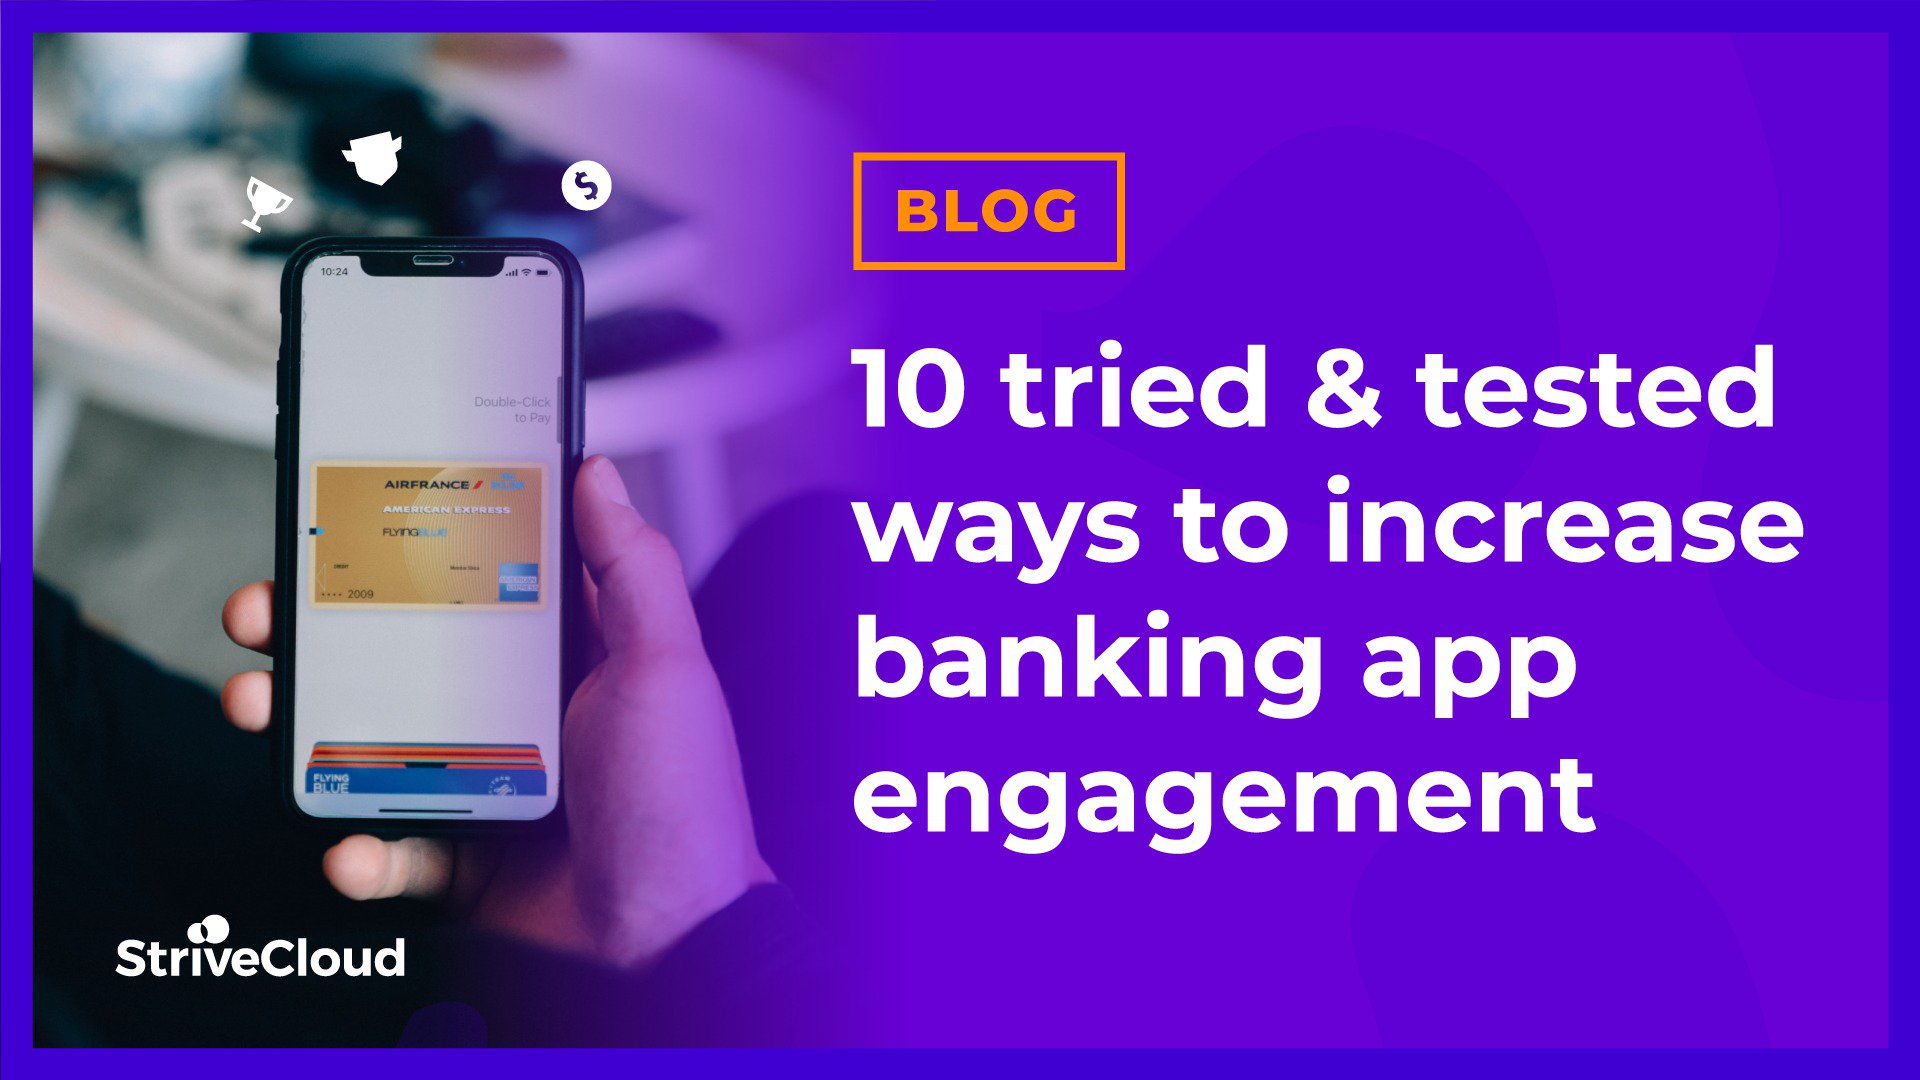 10 tried & tested ways to increase banking app engagement